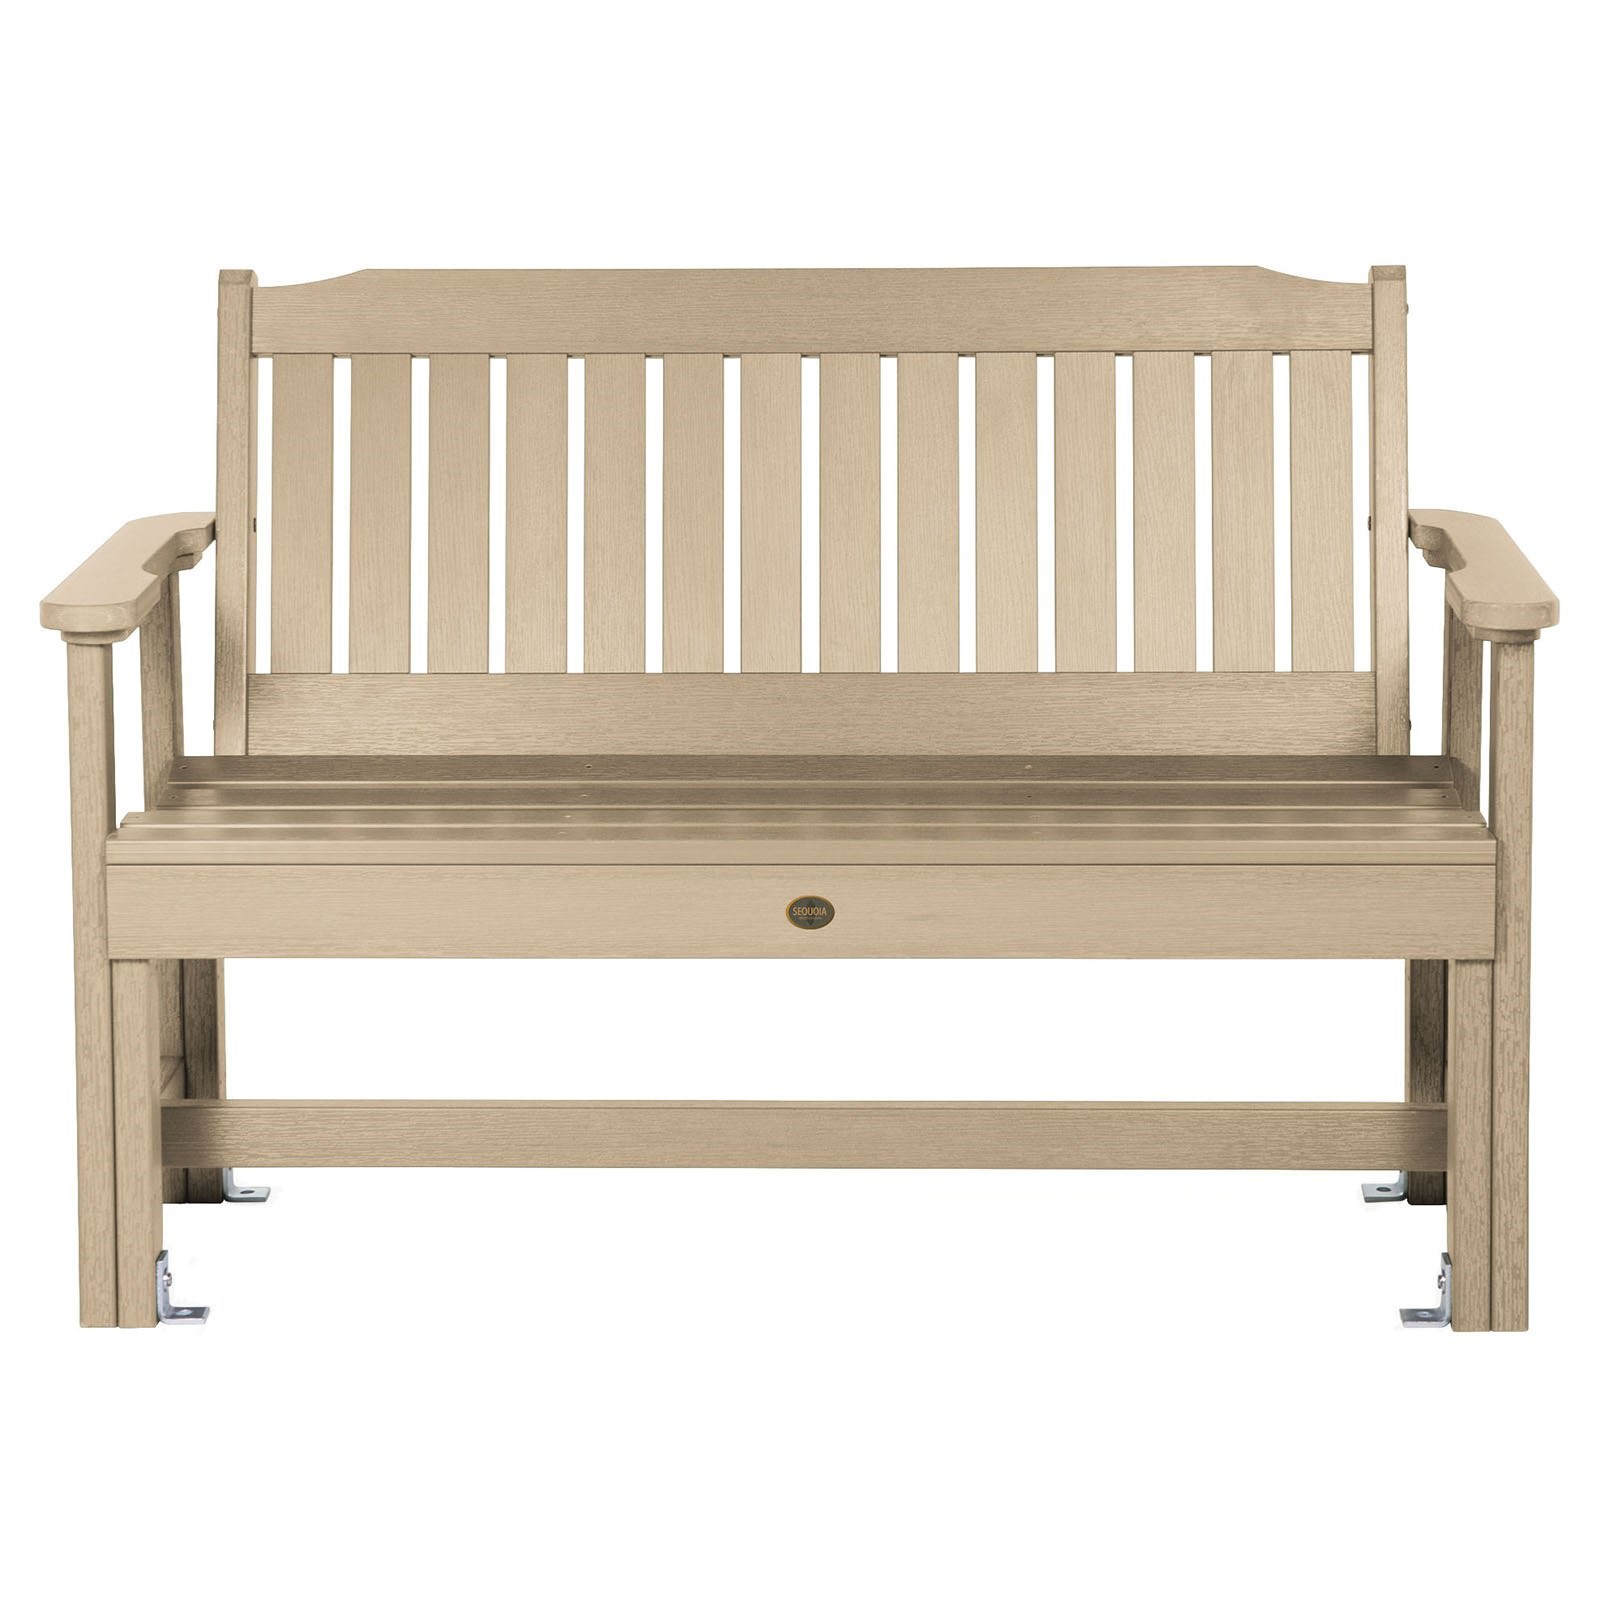 The Sequoia Professional Commercial Grade Exeter 6' Garden Bench - image 1 of 2